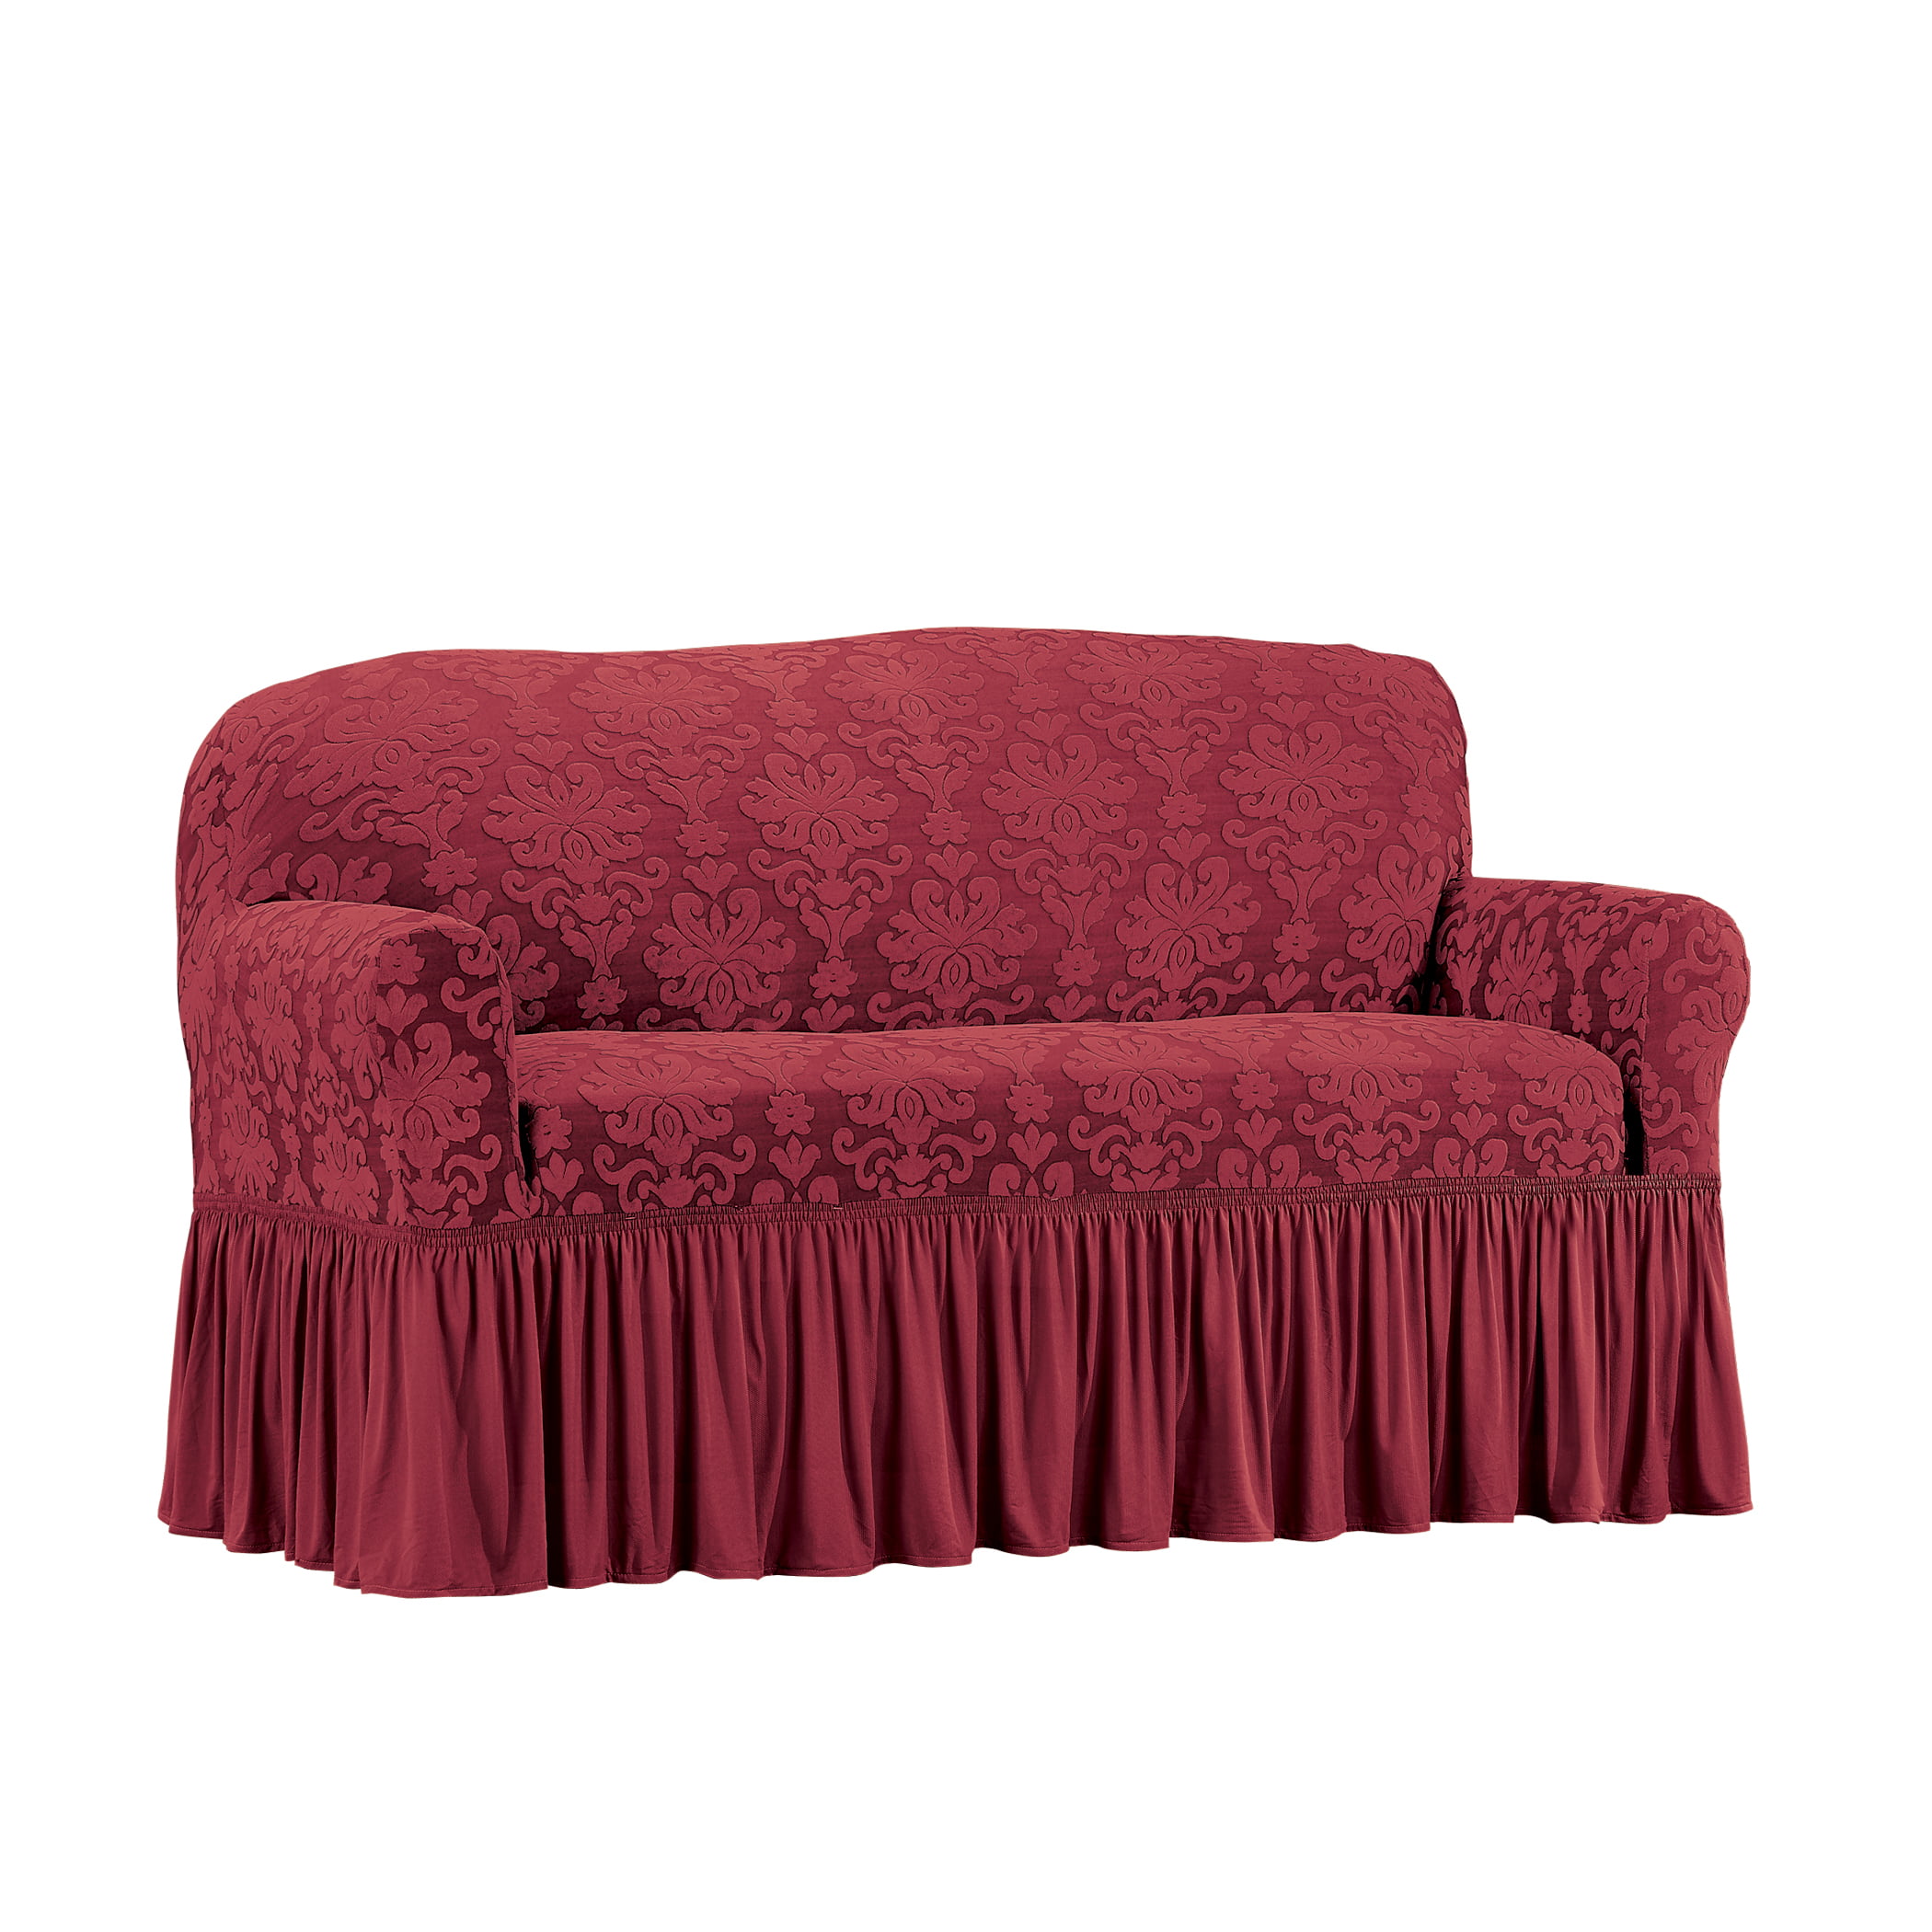 Elegant Ruffled Protective Stretch Furniture Slipcover 1Piece For Couch, Sofa, Chair